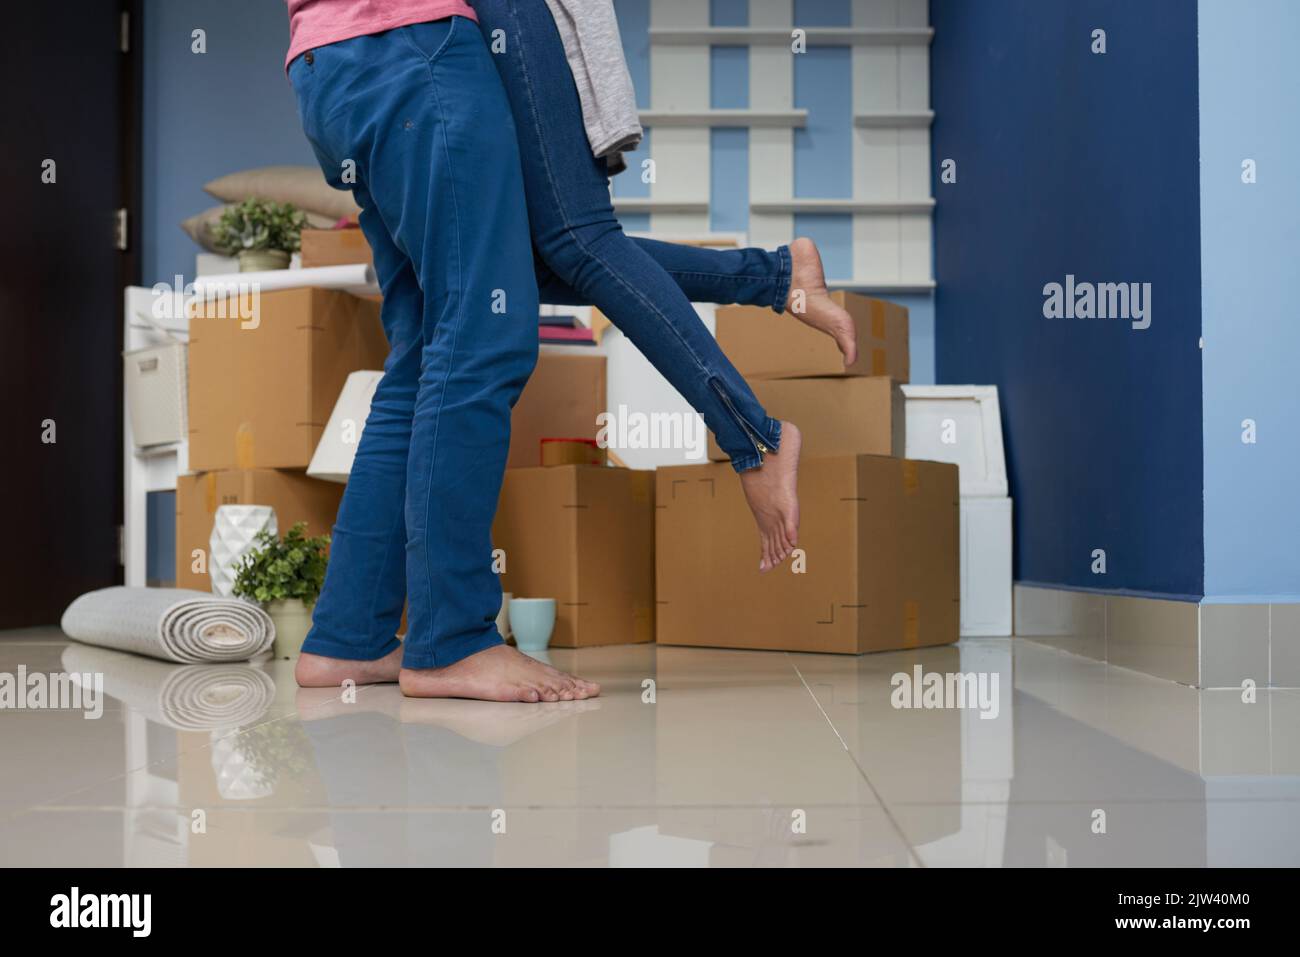 Unrecognizable man lifting his beloved while standing in new apartment with packed cardboard boxes Stock Photo